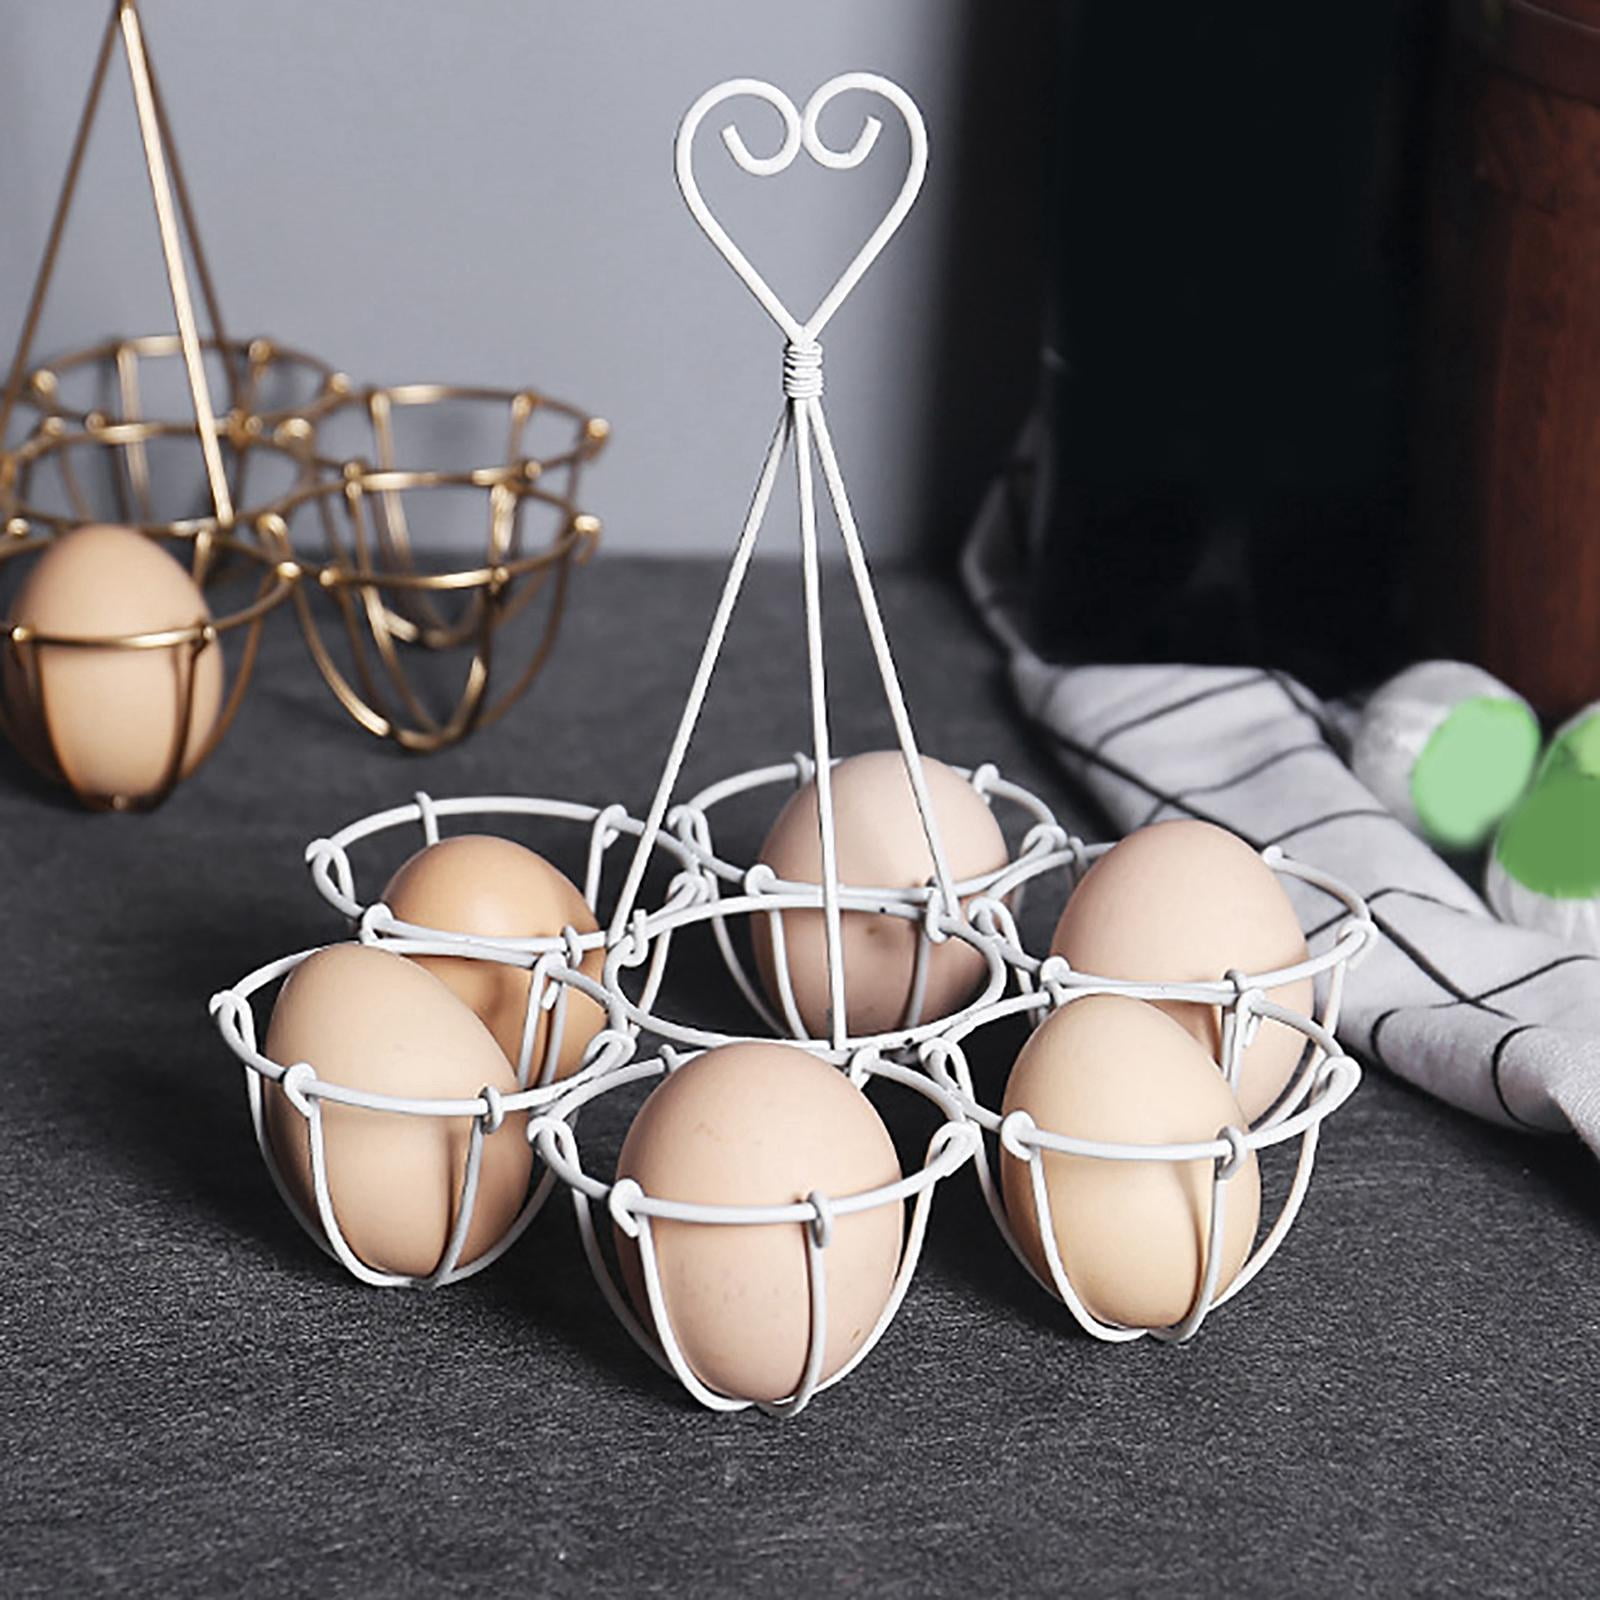 Anti Scratch Egg Holder Countertop Metal Egg Collecting Basket Egg Storage  Basket Kitchen Tool – the best products in the Joom Geek online store